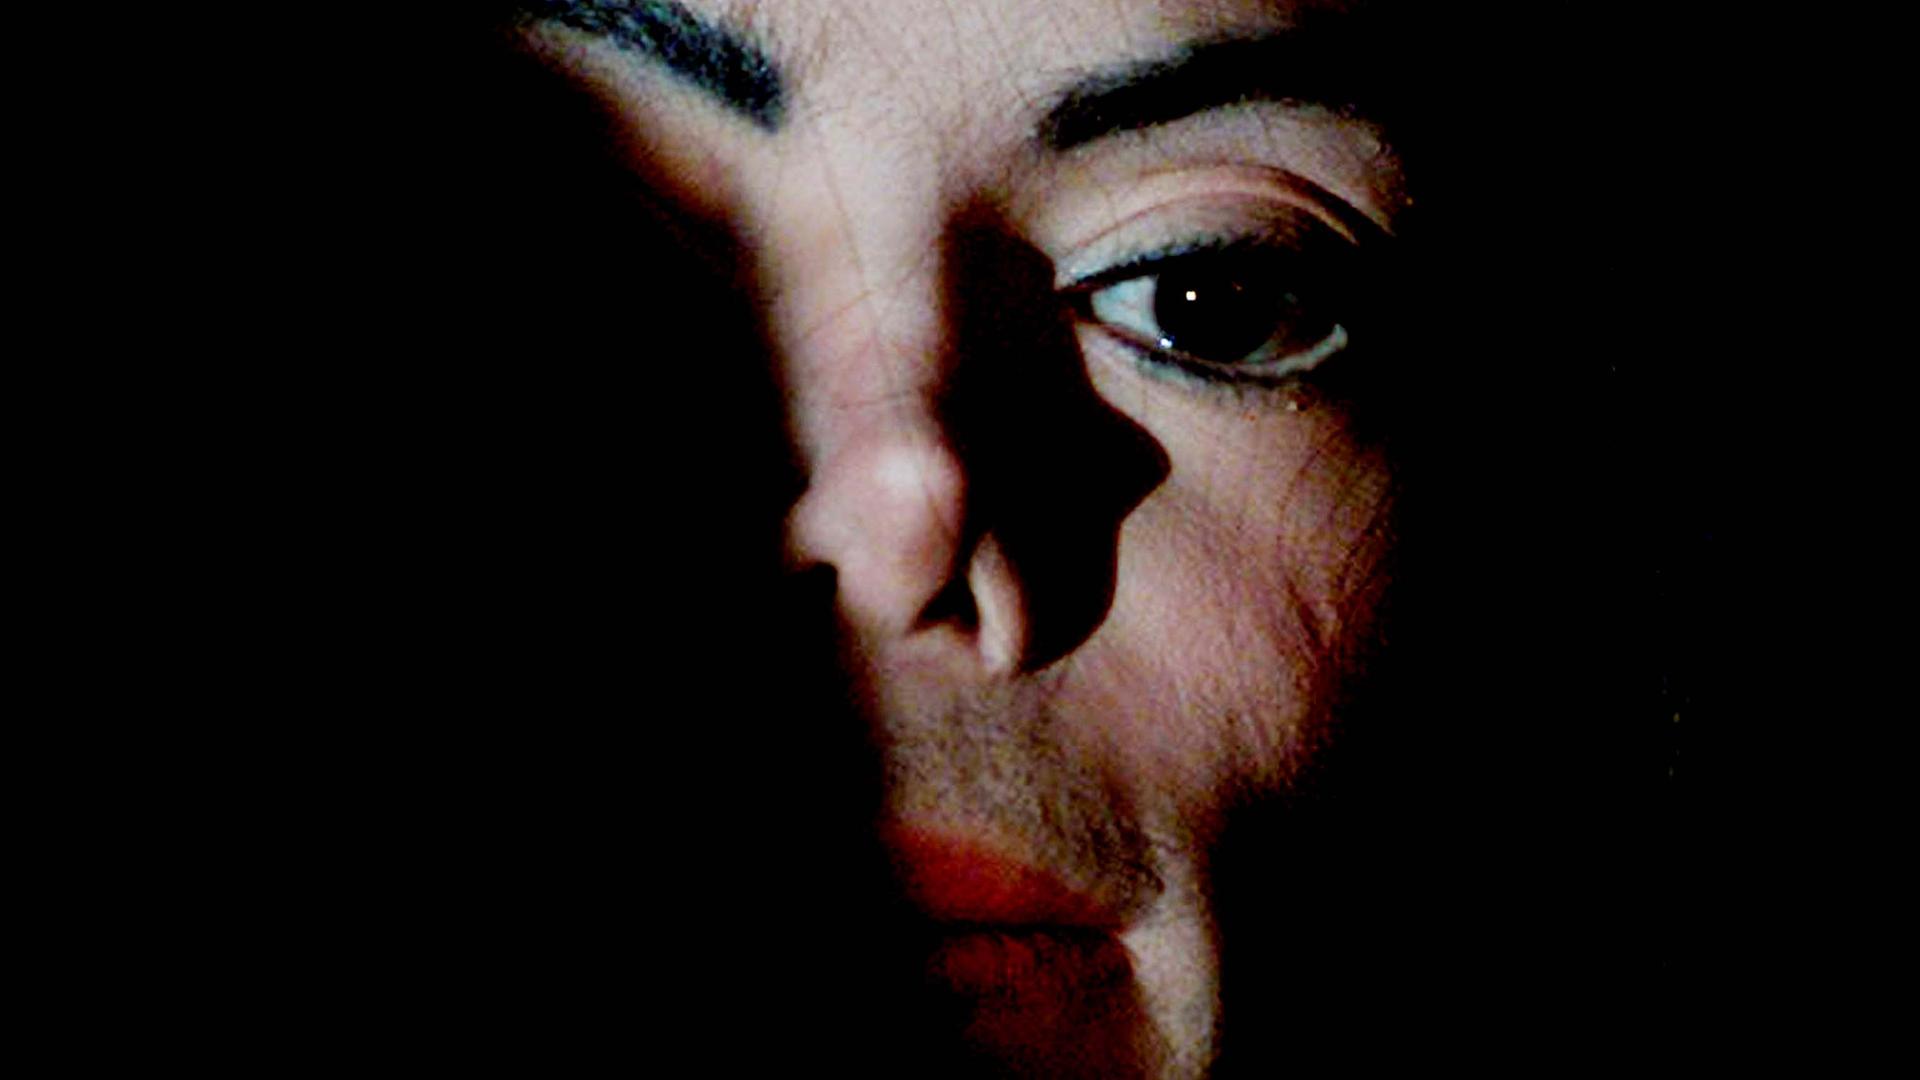 A shadowy face of Michael Jackson